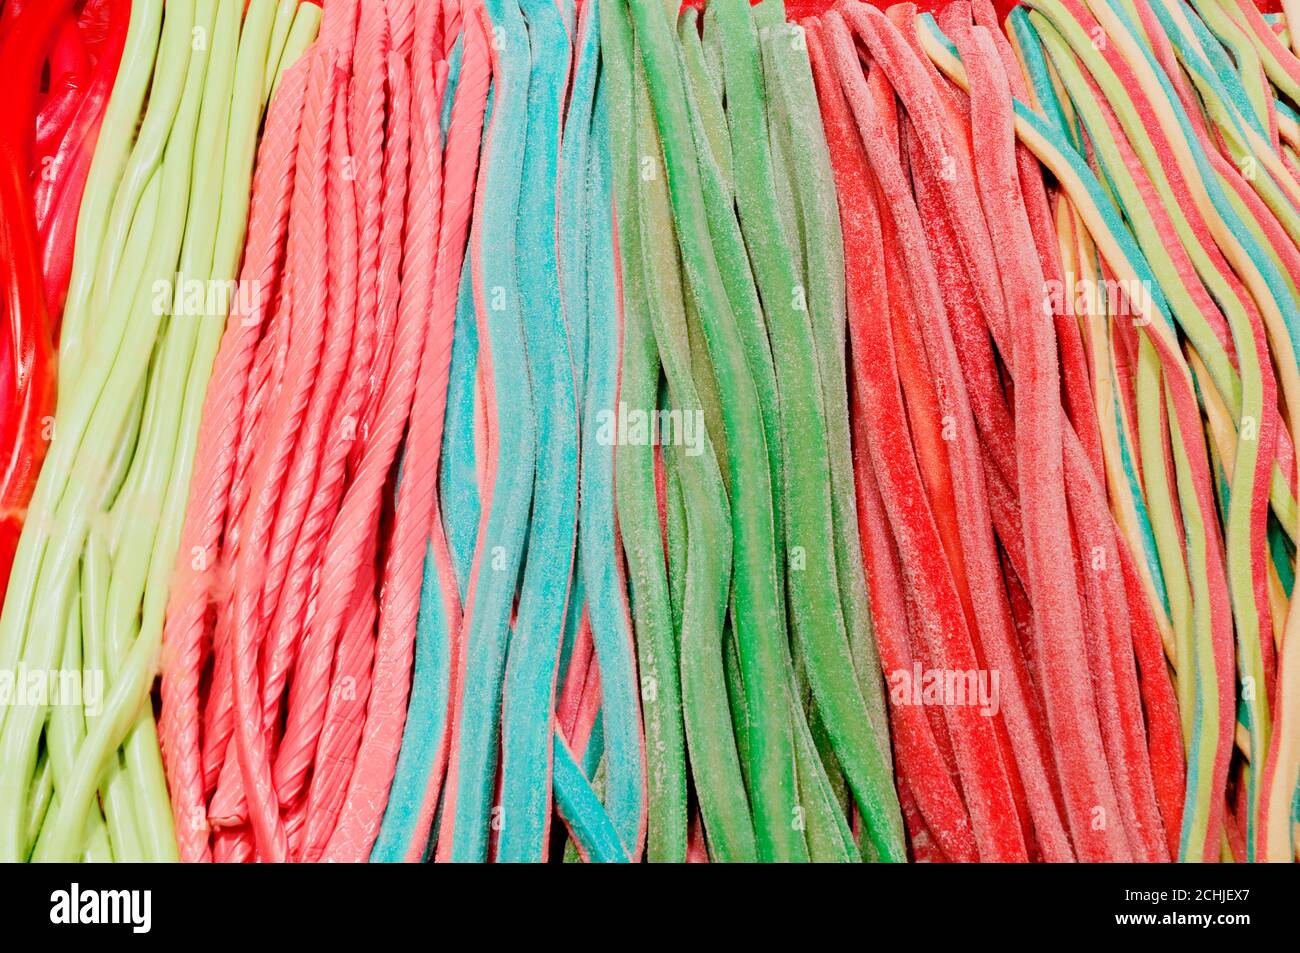 Colorful sweets. Stock Photo